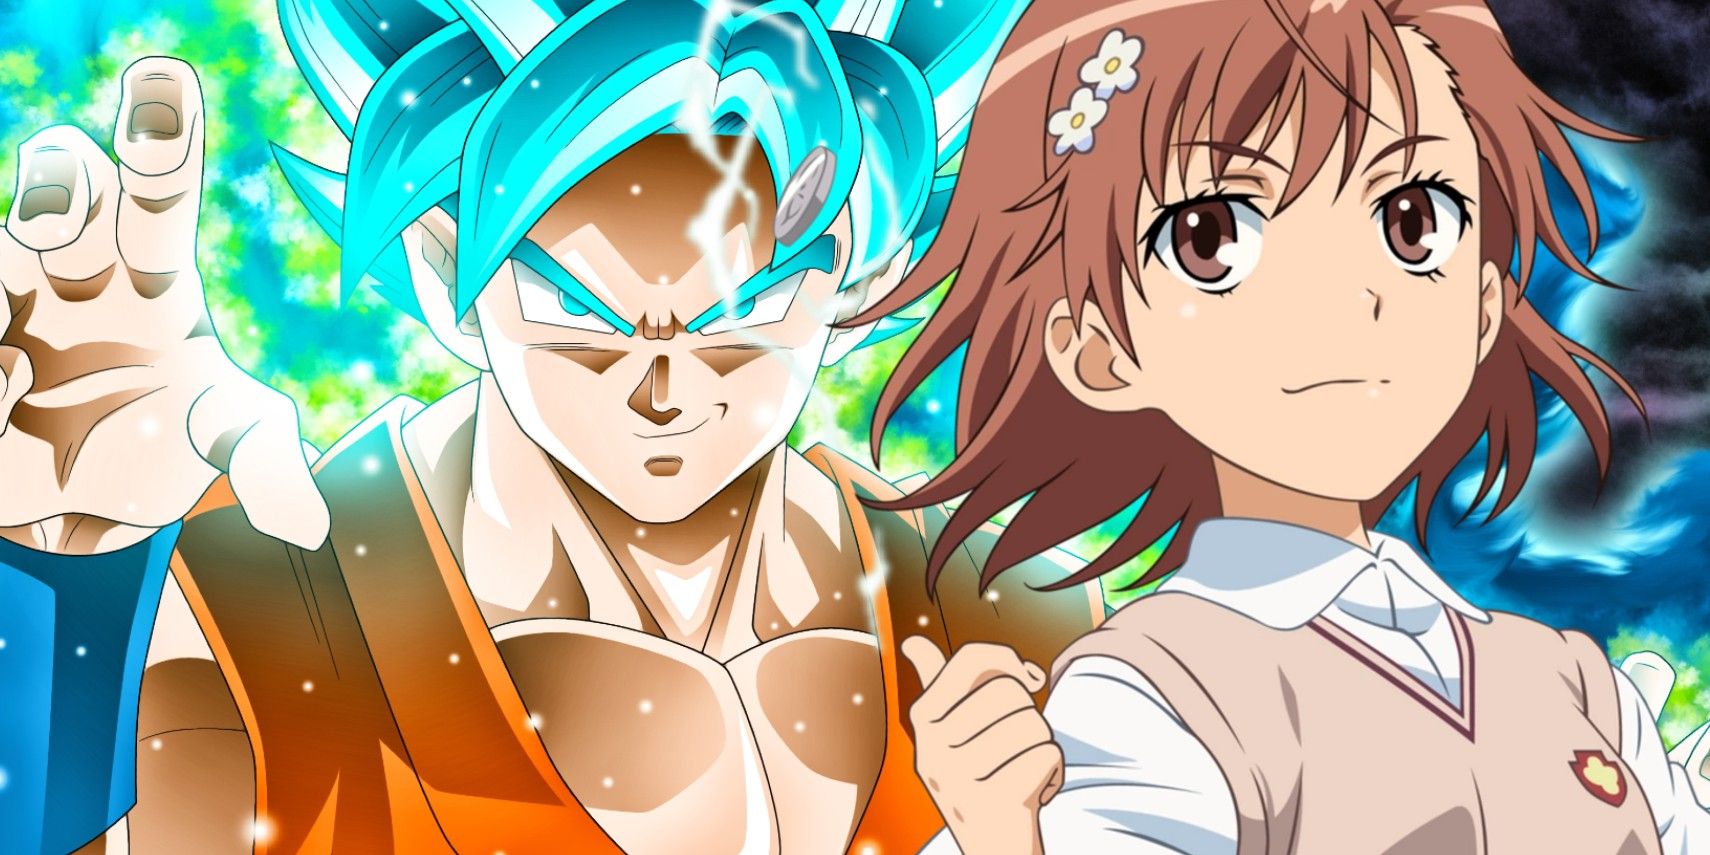 10 Strongest Laser Users In Anime, Ranked